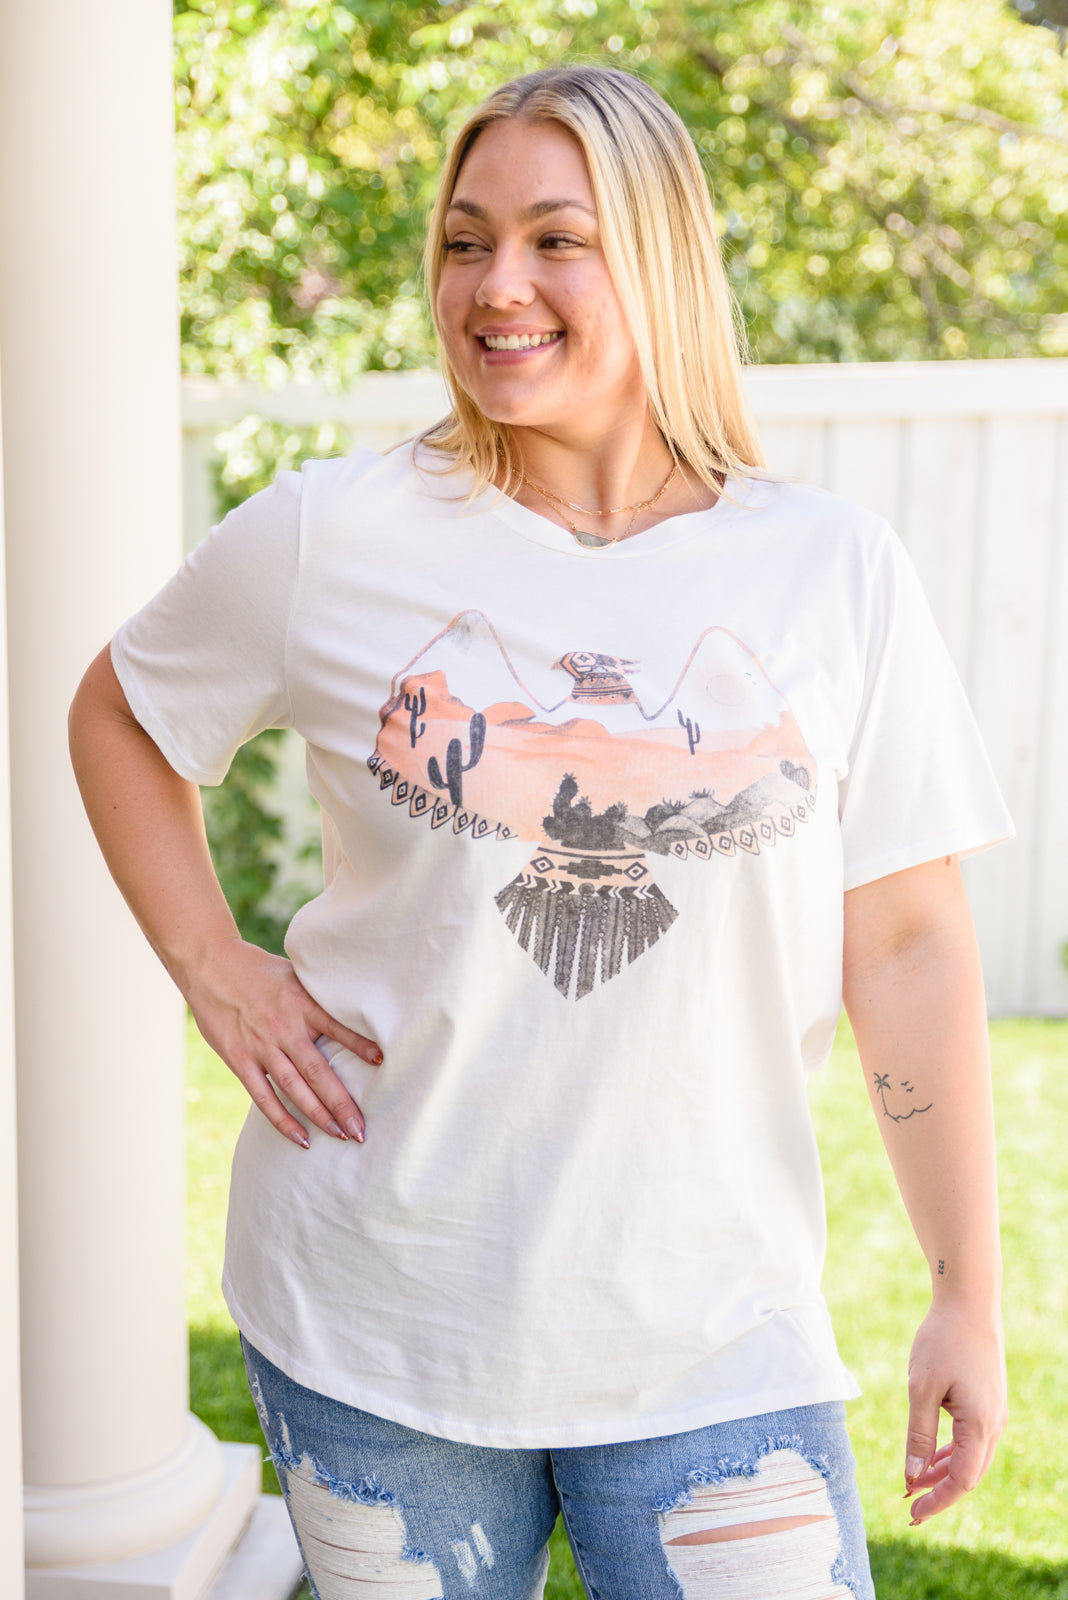 View Graphic T-Shirt (Online Uptown Boutique Ramona